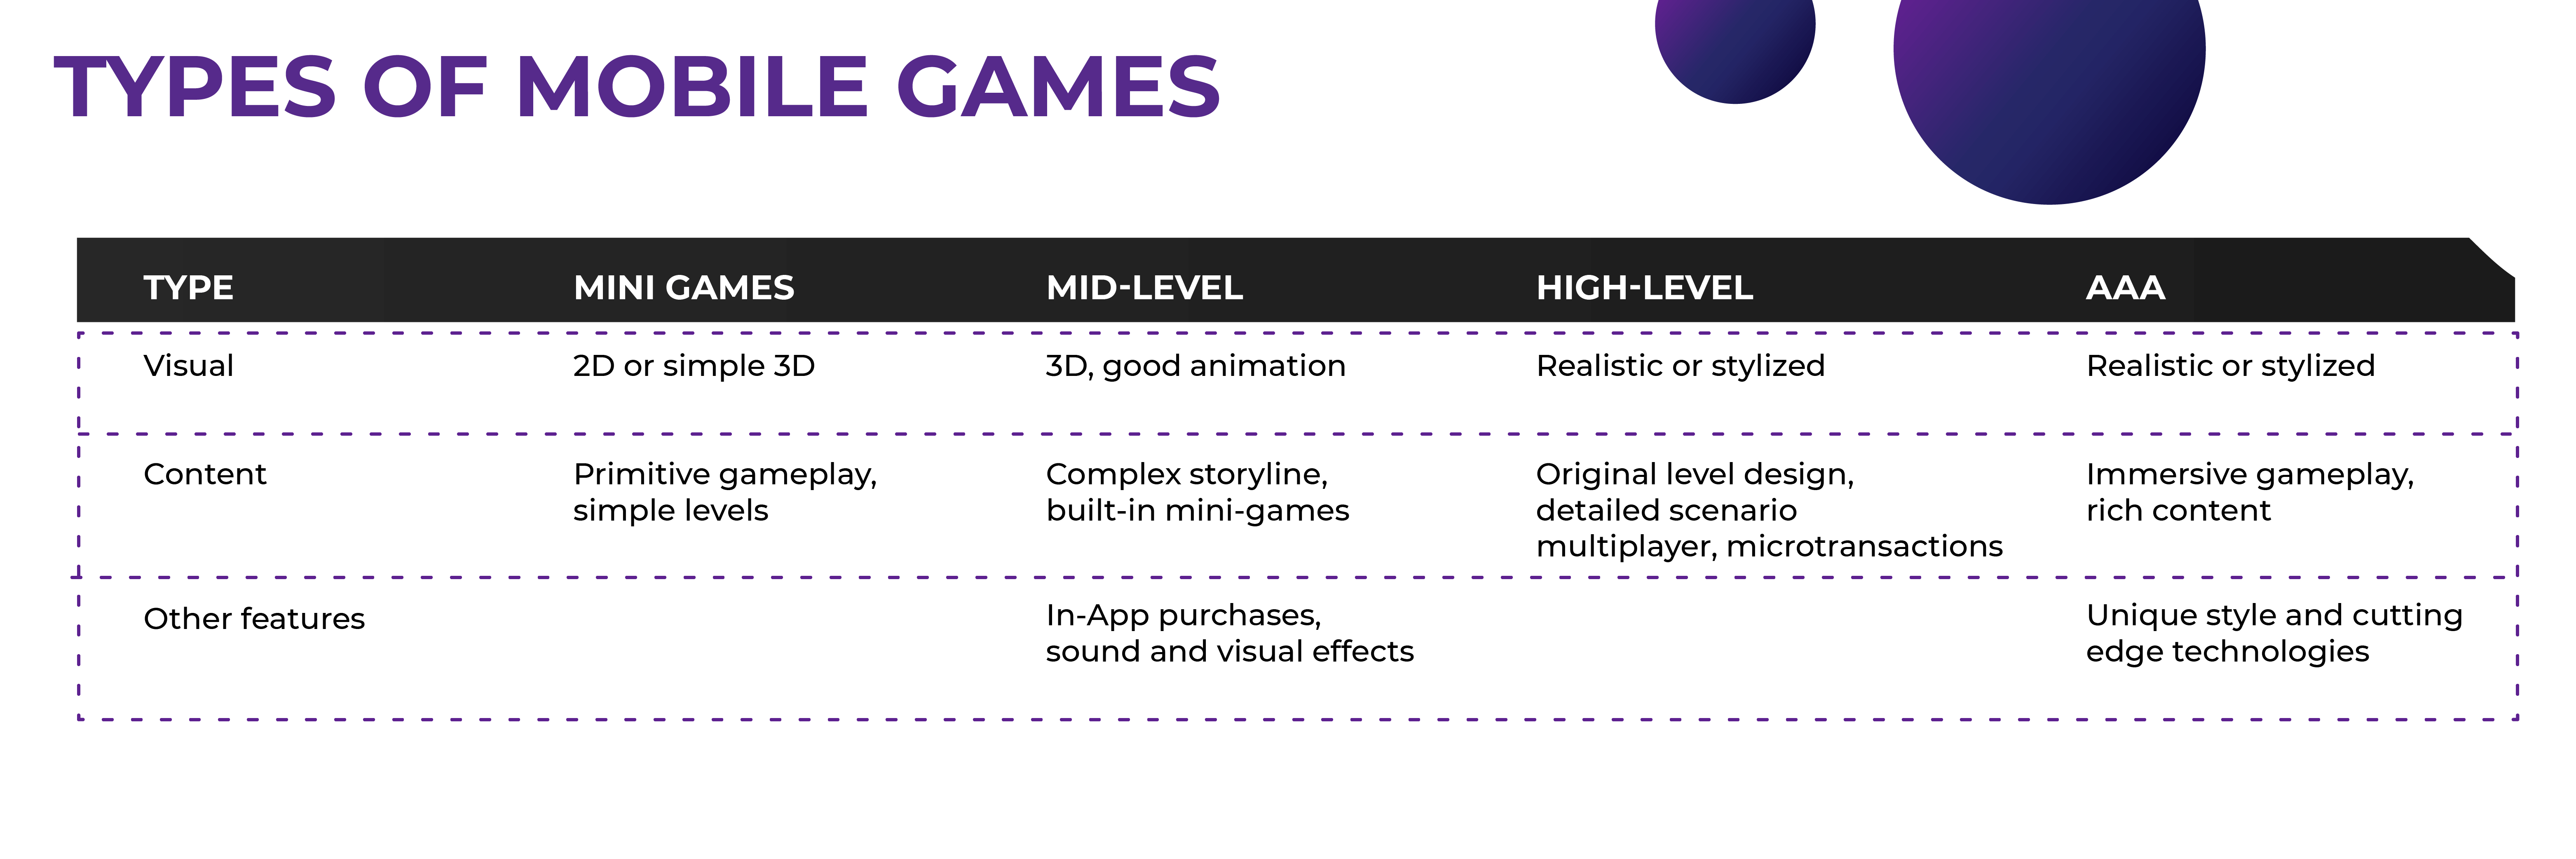 Mobile game types